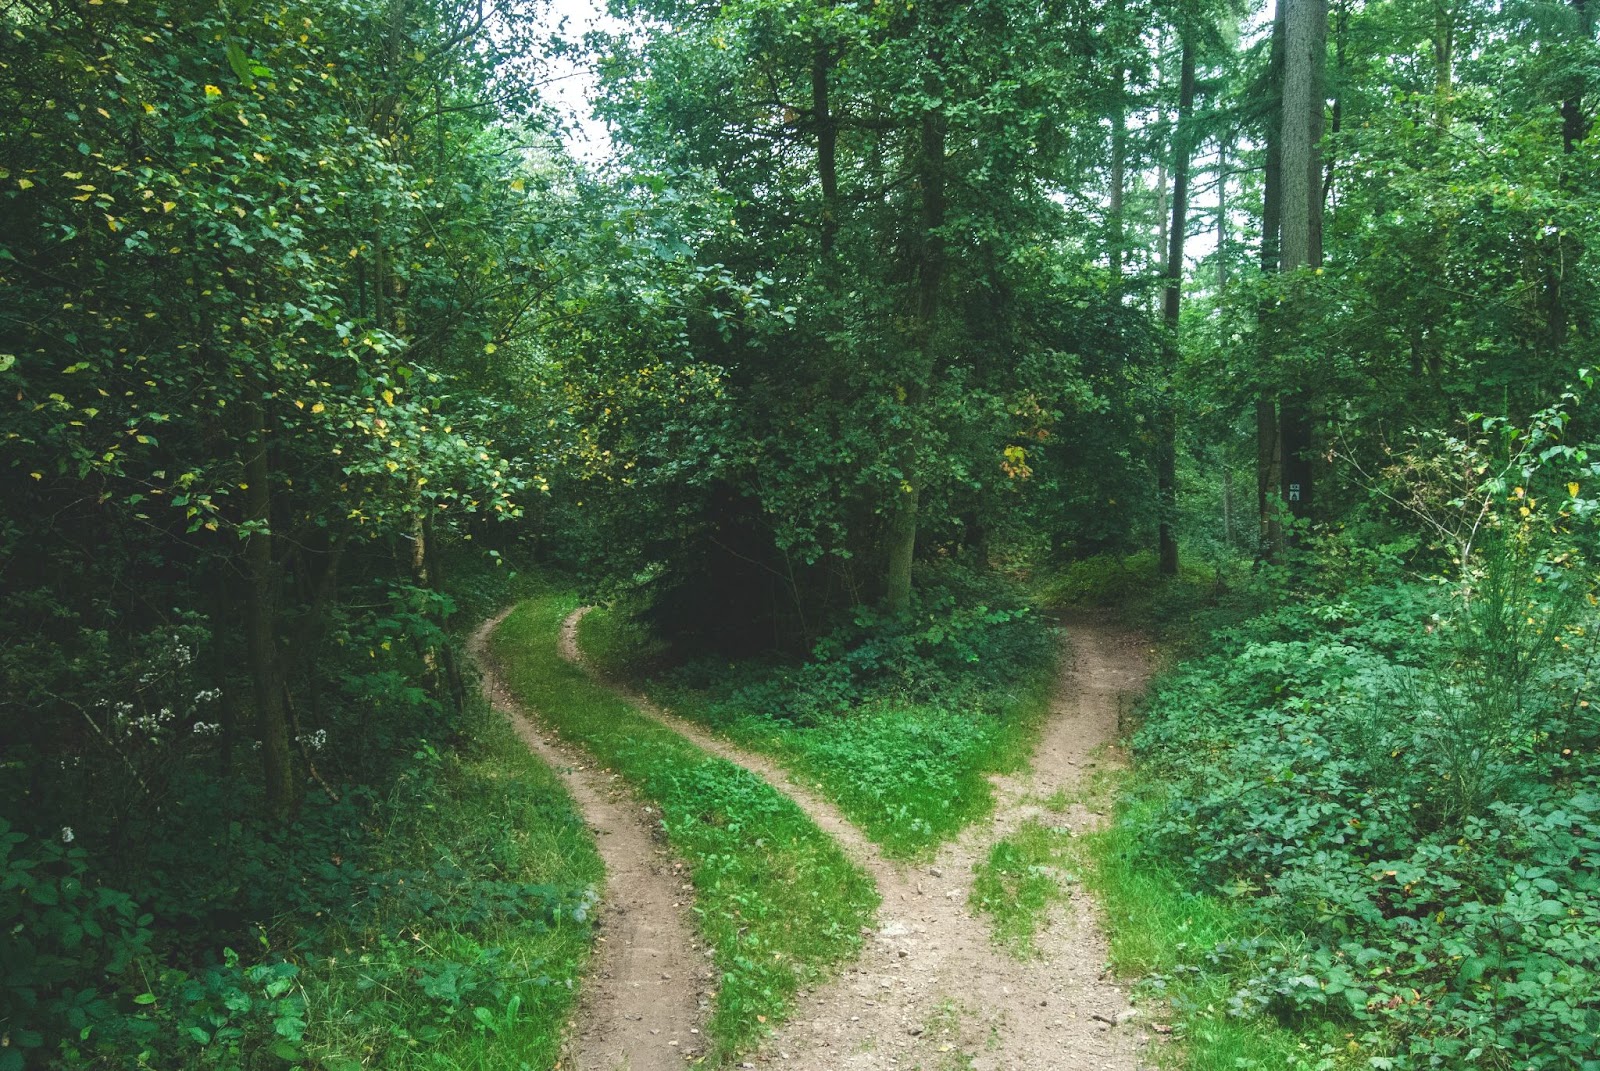 Two dirt roads separating in the forest